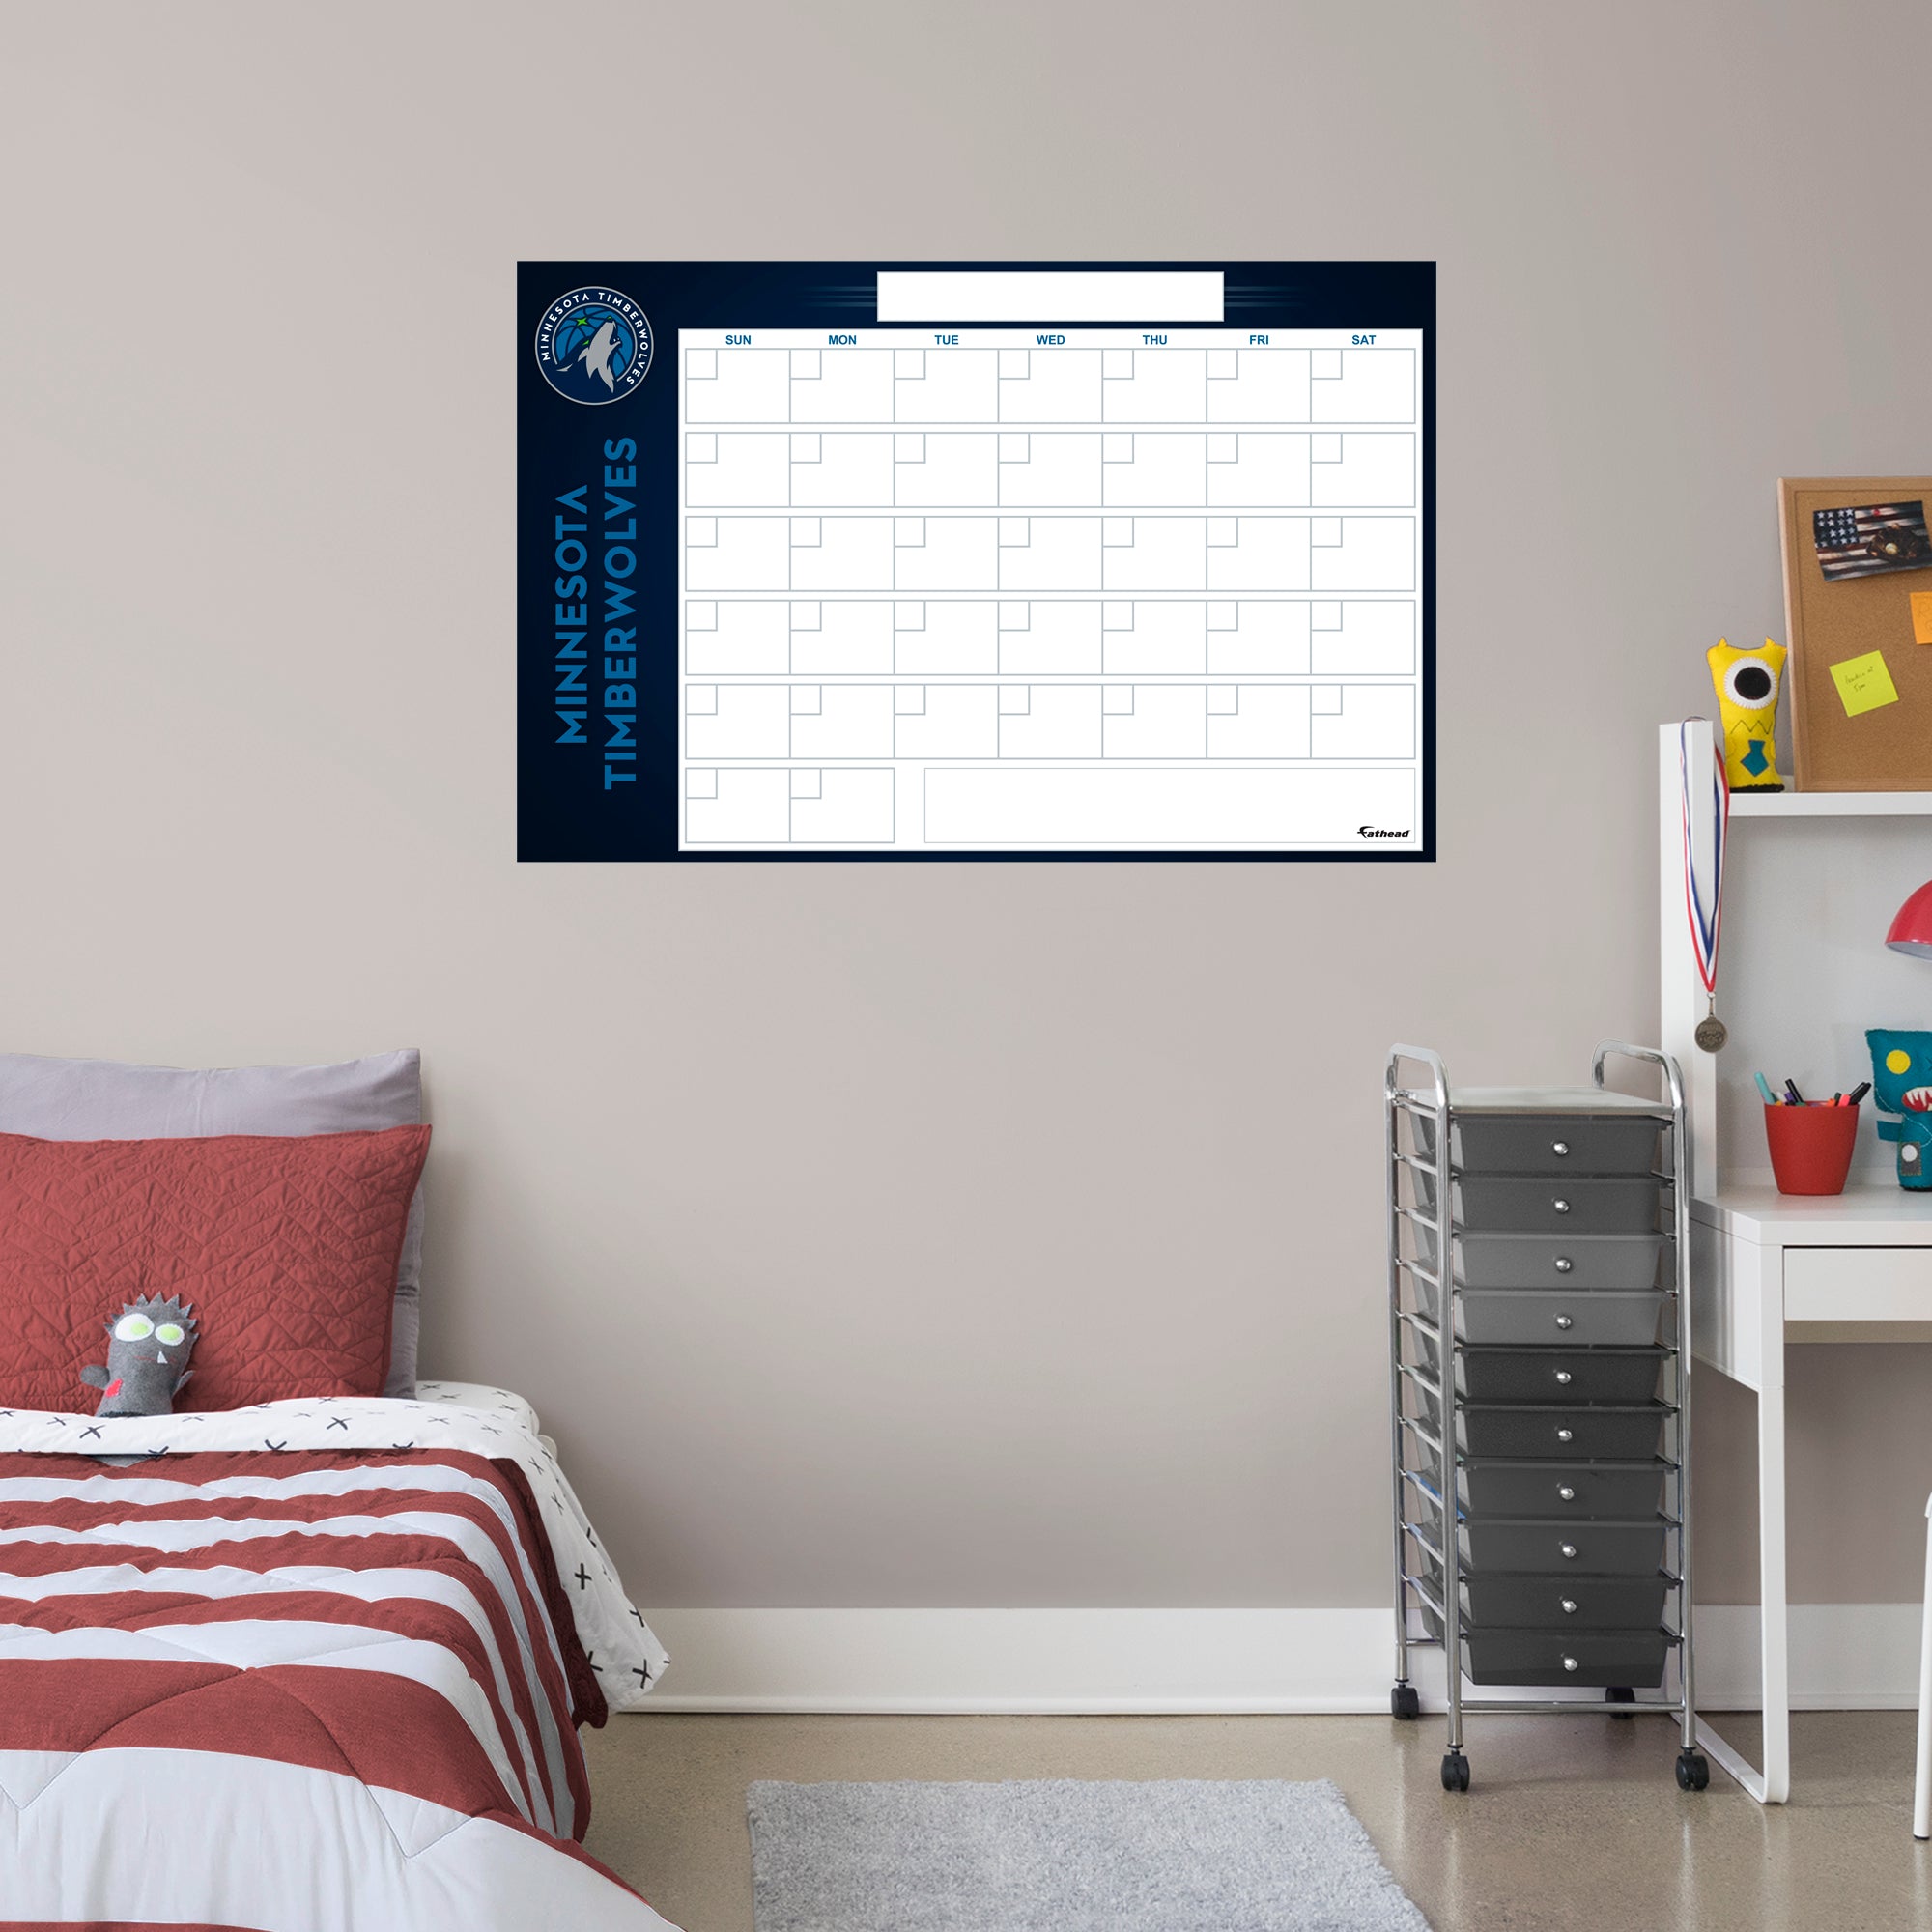 Minnesota Timberwolves Dry Erase Calendar - Officially Licensed NBA Removable Wall Decal Giant Decal (34"W x 52"H) by Fathead |